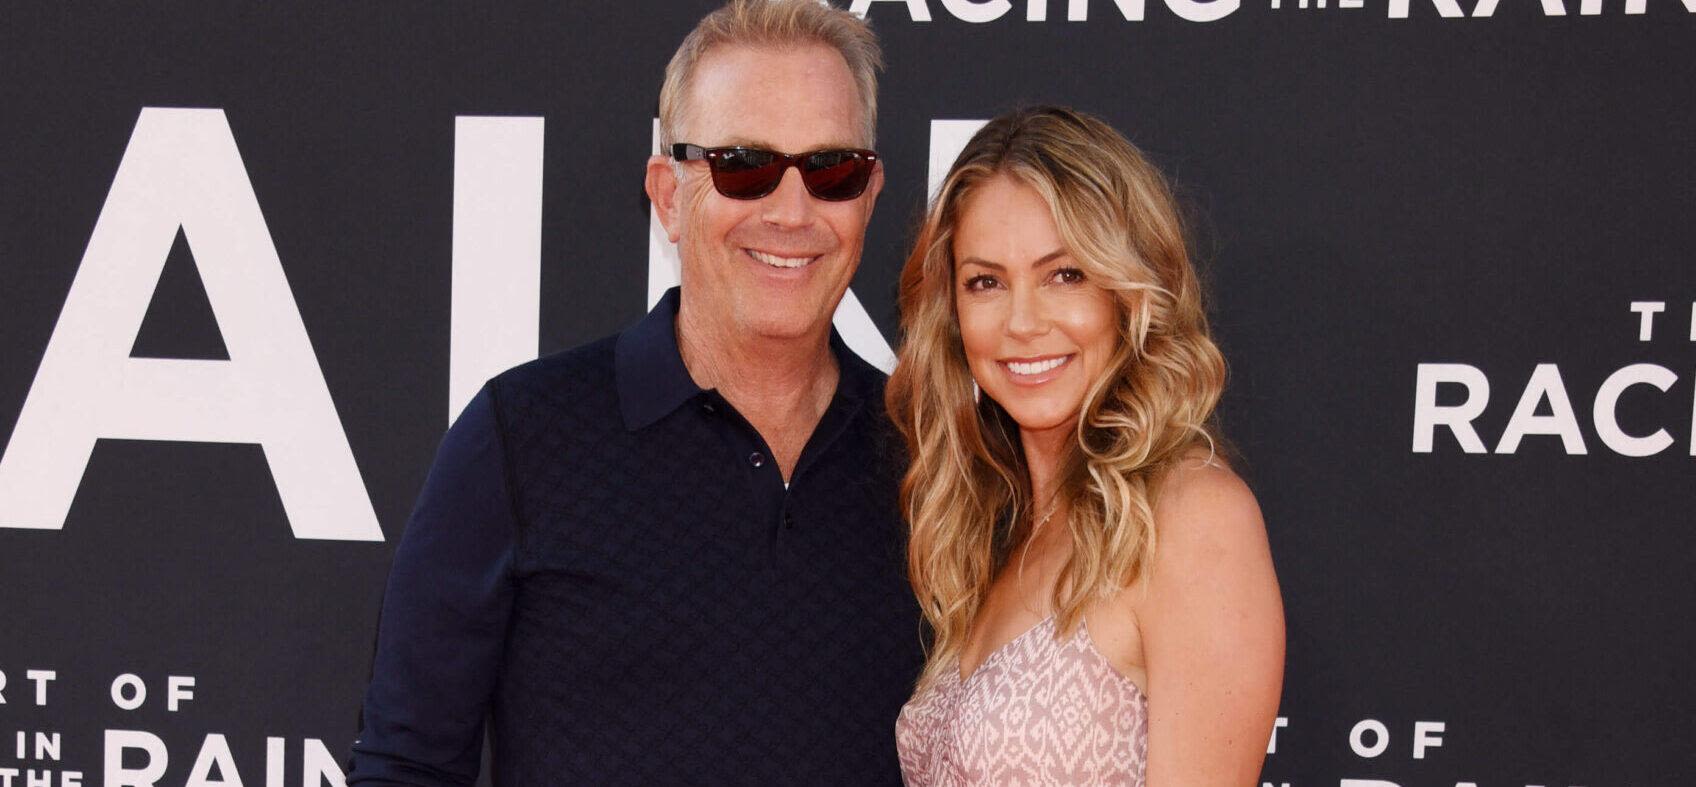 Kevin Costner's Ex-wife Allegedly Planning To Marry The Actor's Former Financier Friend